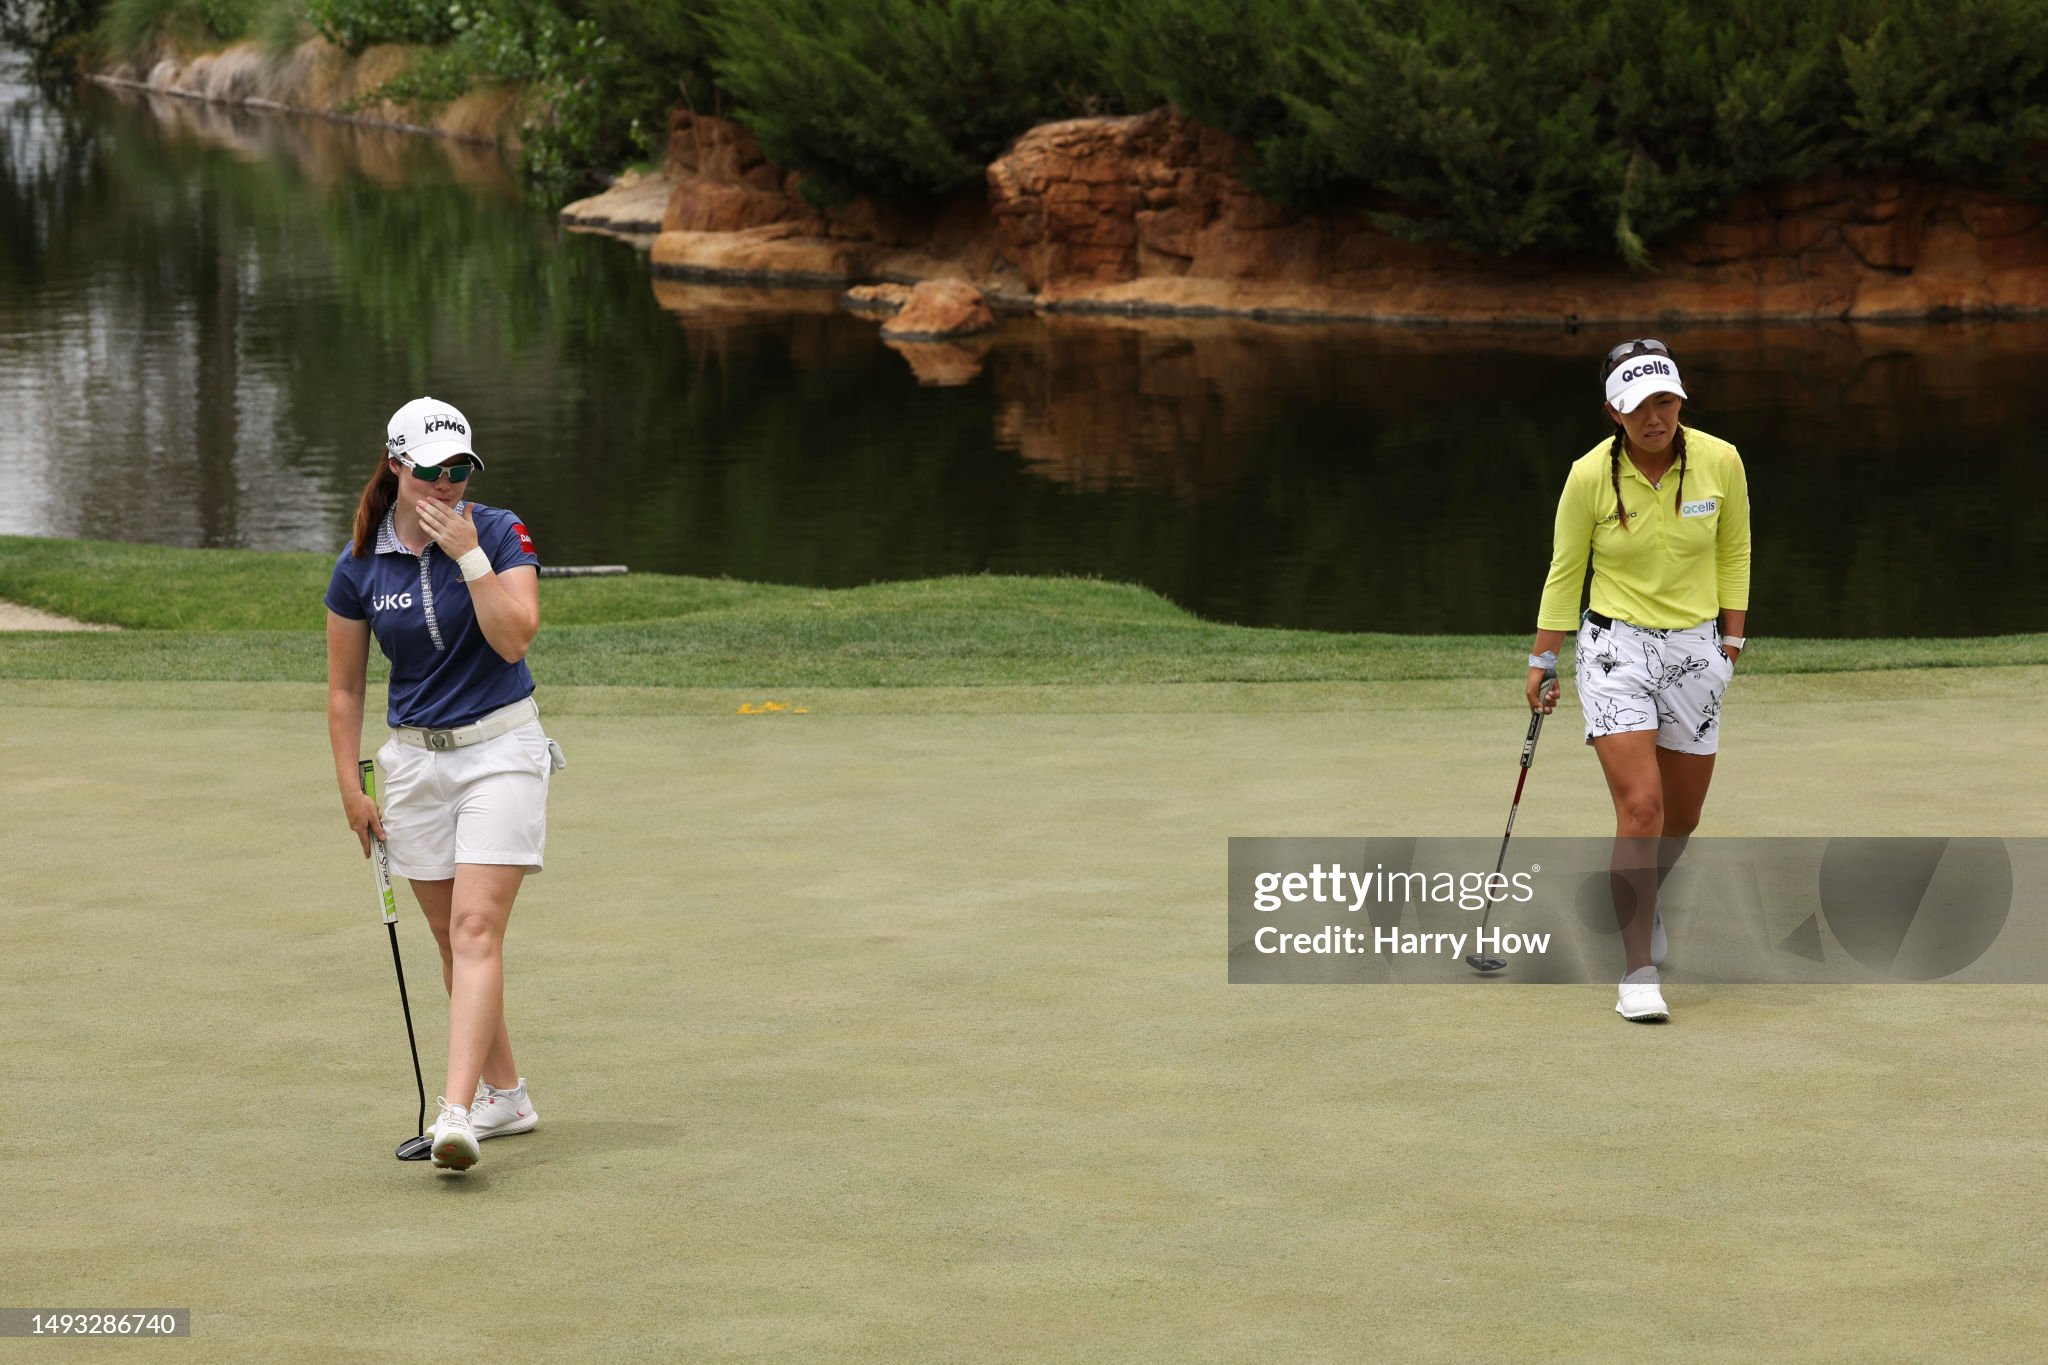 https://media.gettyimages.com/id/1493286740/photo/bank-of-hope-lpga-match-play-presented-by-mgm-rewards-day-two.jpg?s=2048x2048&w=gi&k=20&c=OCenvOqeO9-5uuGbX7nWxKHT8Lih1n5mtCoLakbfvBk=